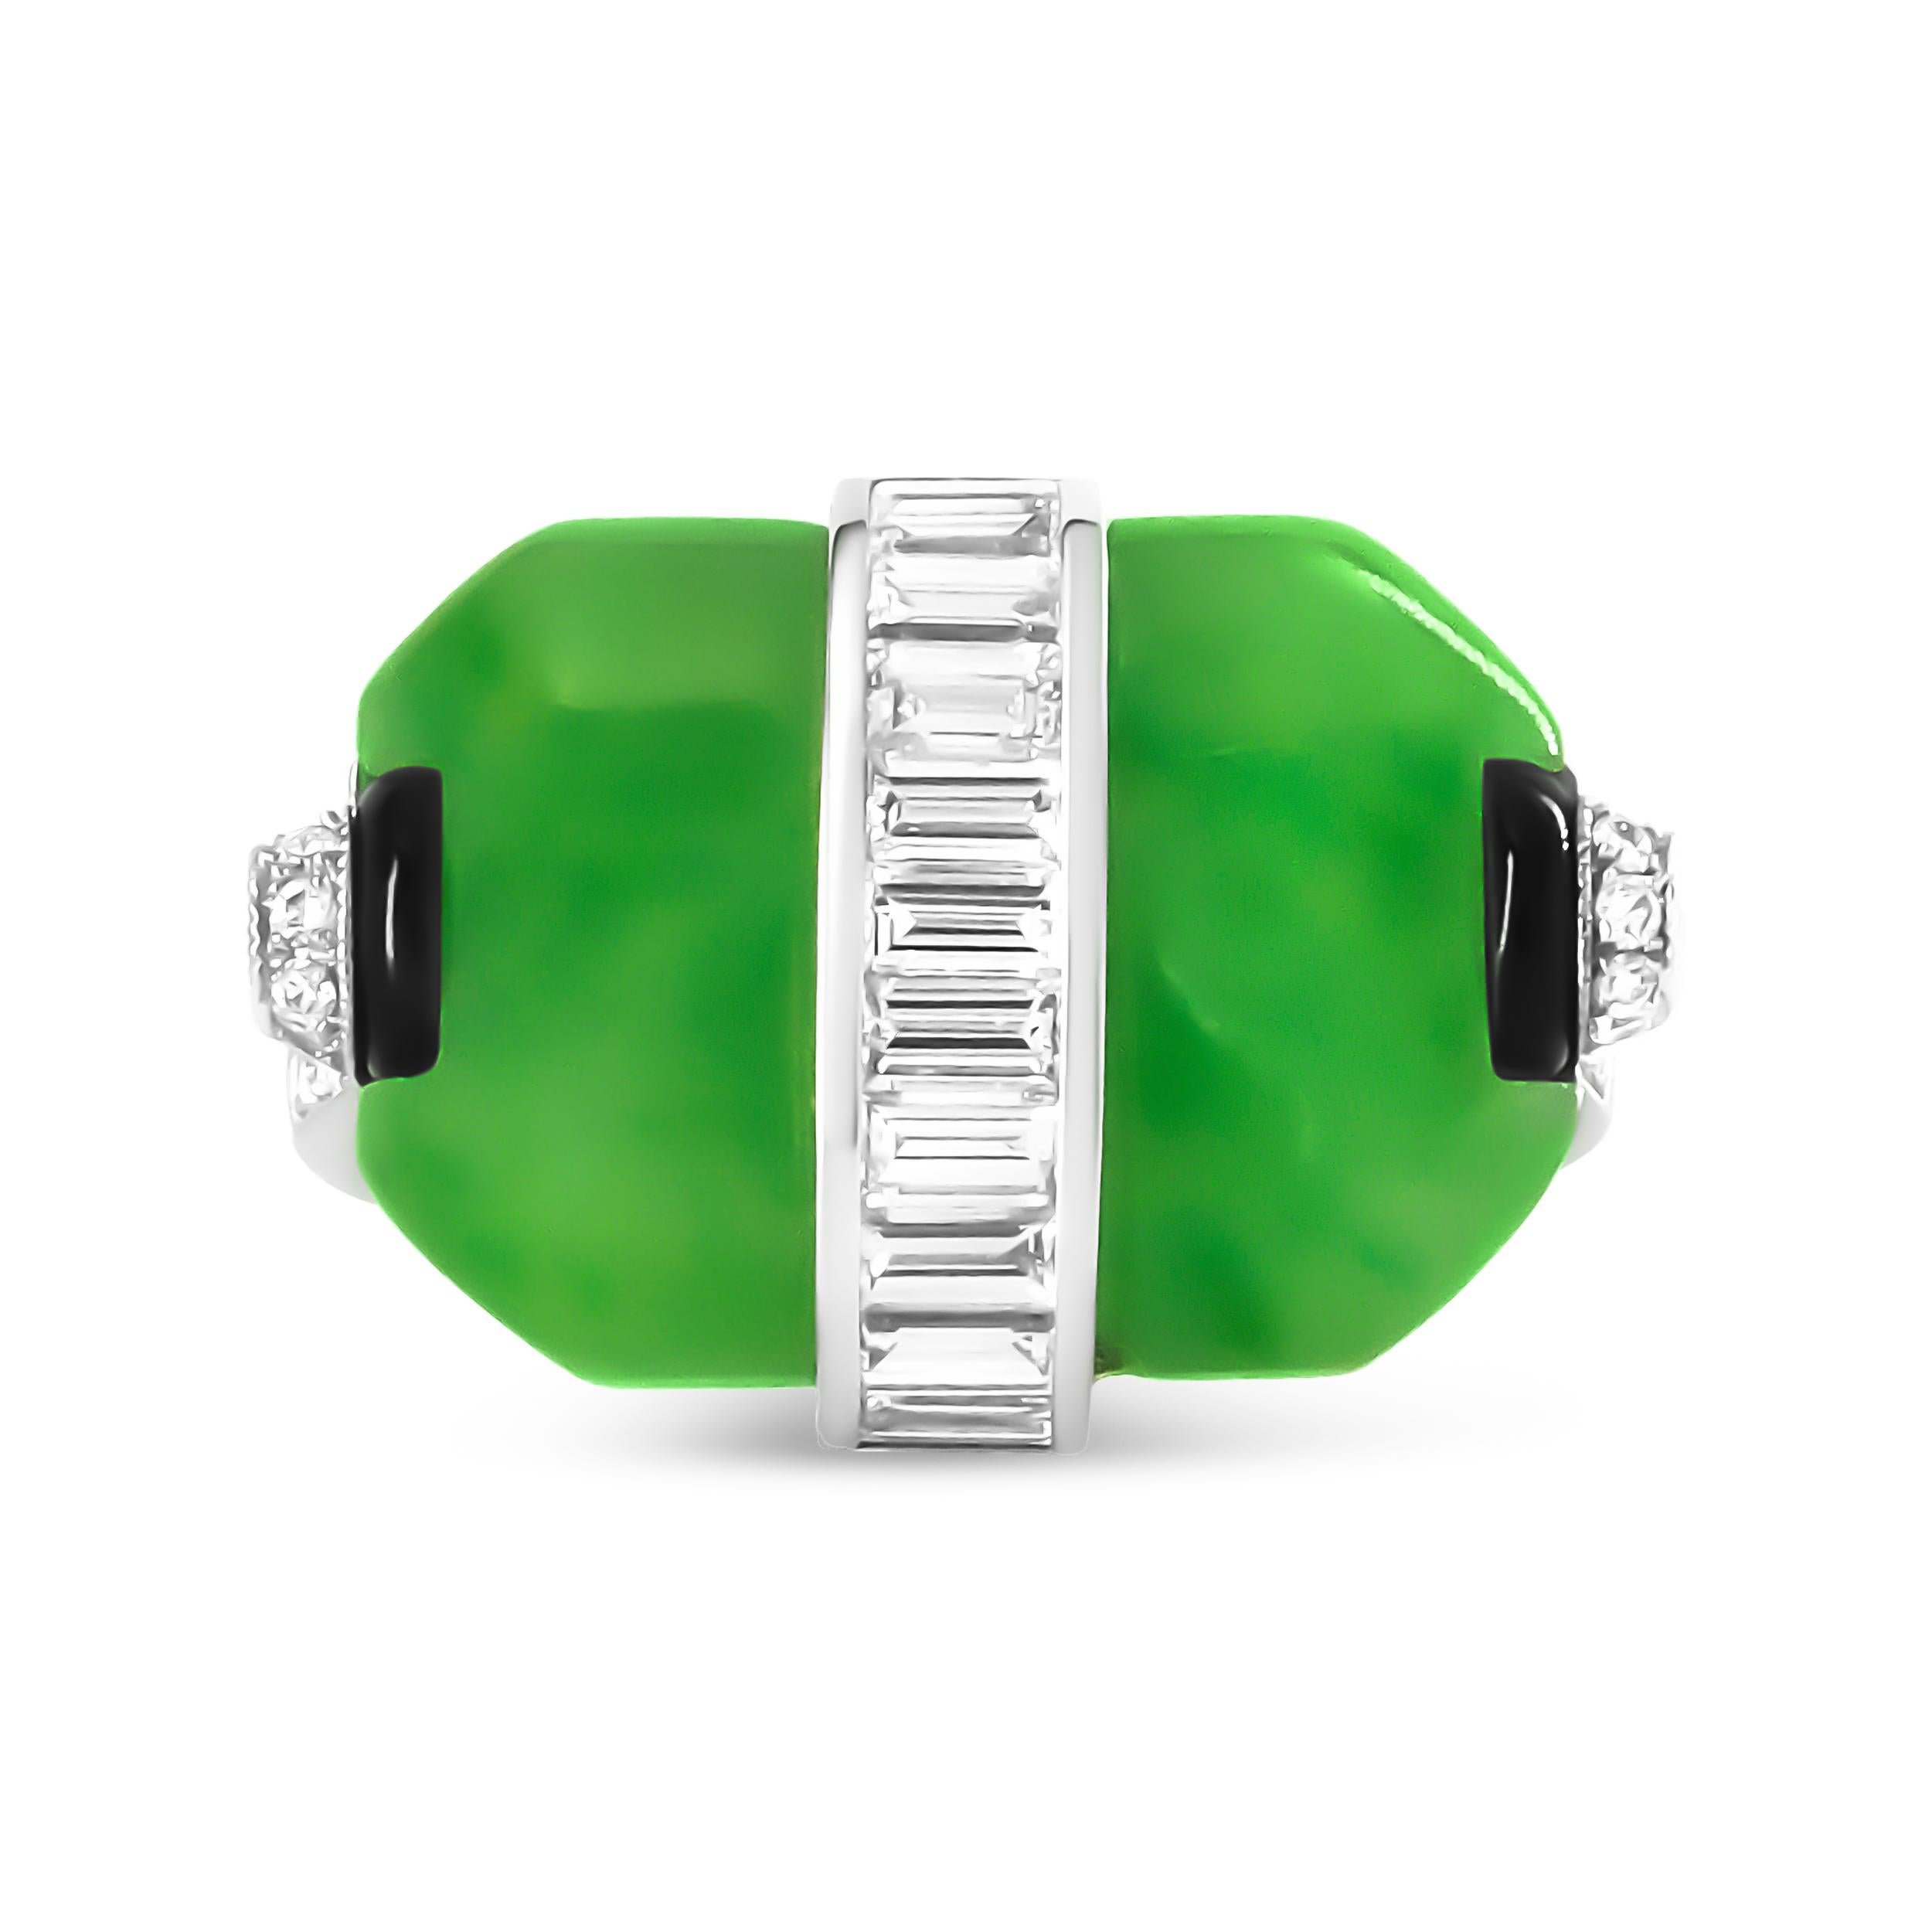 This white platinum diamond and gemstone cocktail ring is certain to make a statement with its bold color and dazzling sparkle. Jade is treasured as one of the world's most culturally significant gemstones, considered a symbol of good fortune. This